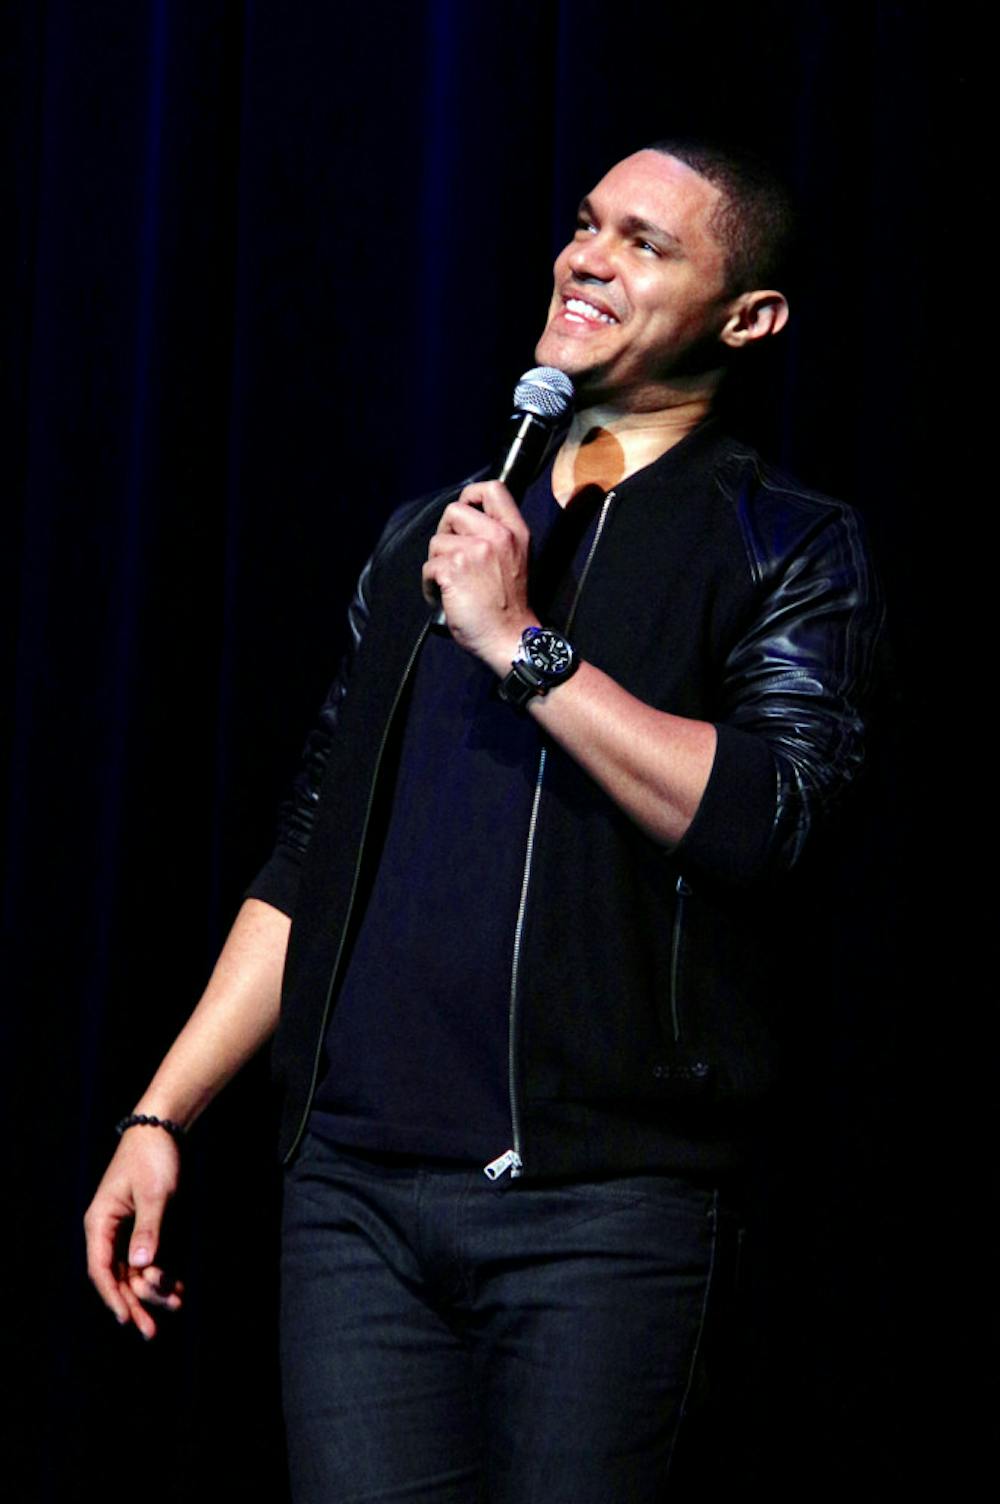 <p>Trevor Noah, the host of Comedy Central’s “The Daily Show,” performs at the Phillips Center for the Performing Arts on Wednesday night.</p>